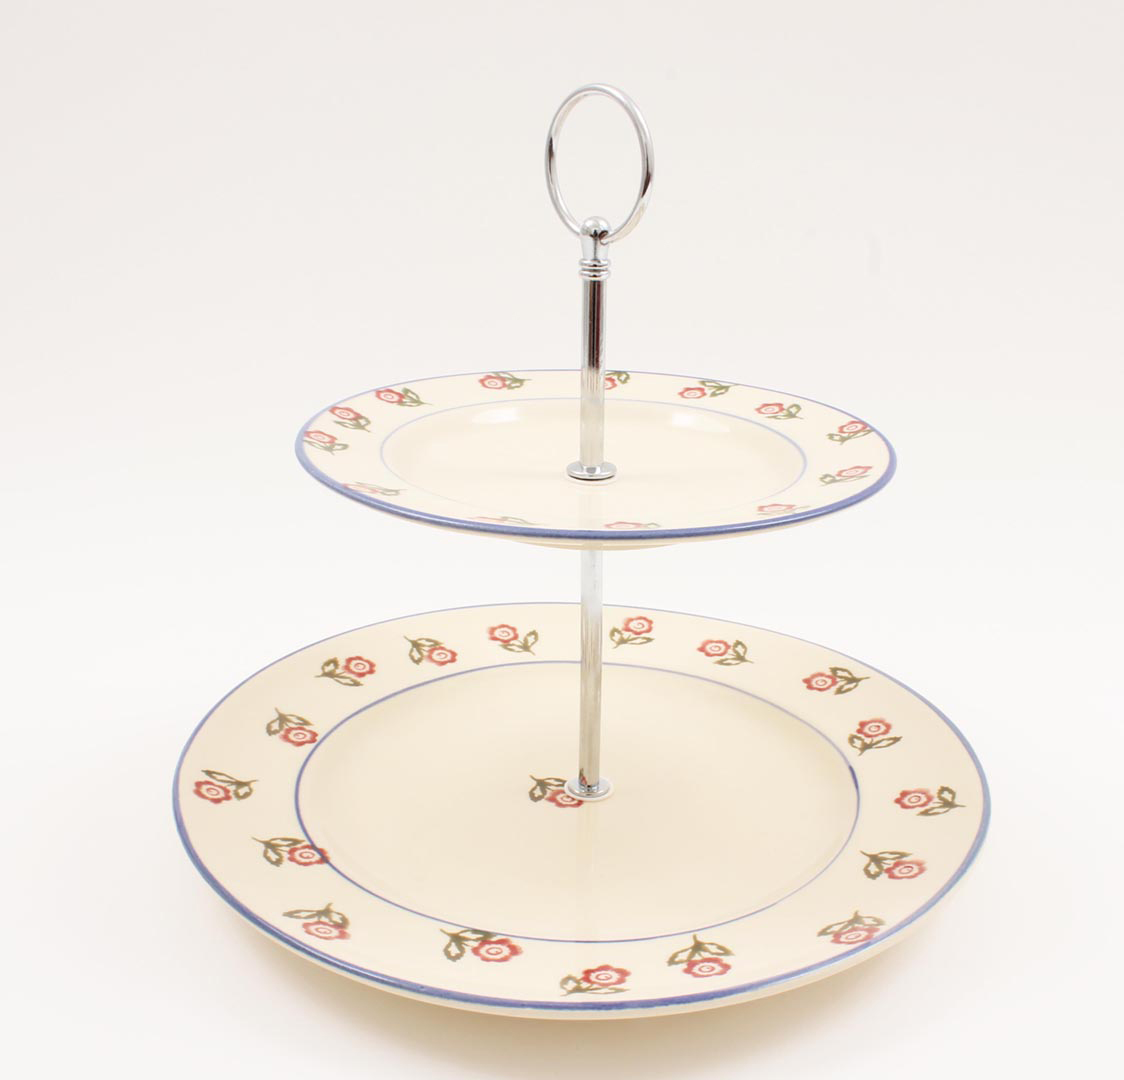 Brixton Scattered Rose Cake Stand 2 Tier Gift